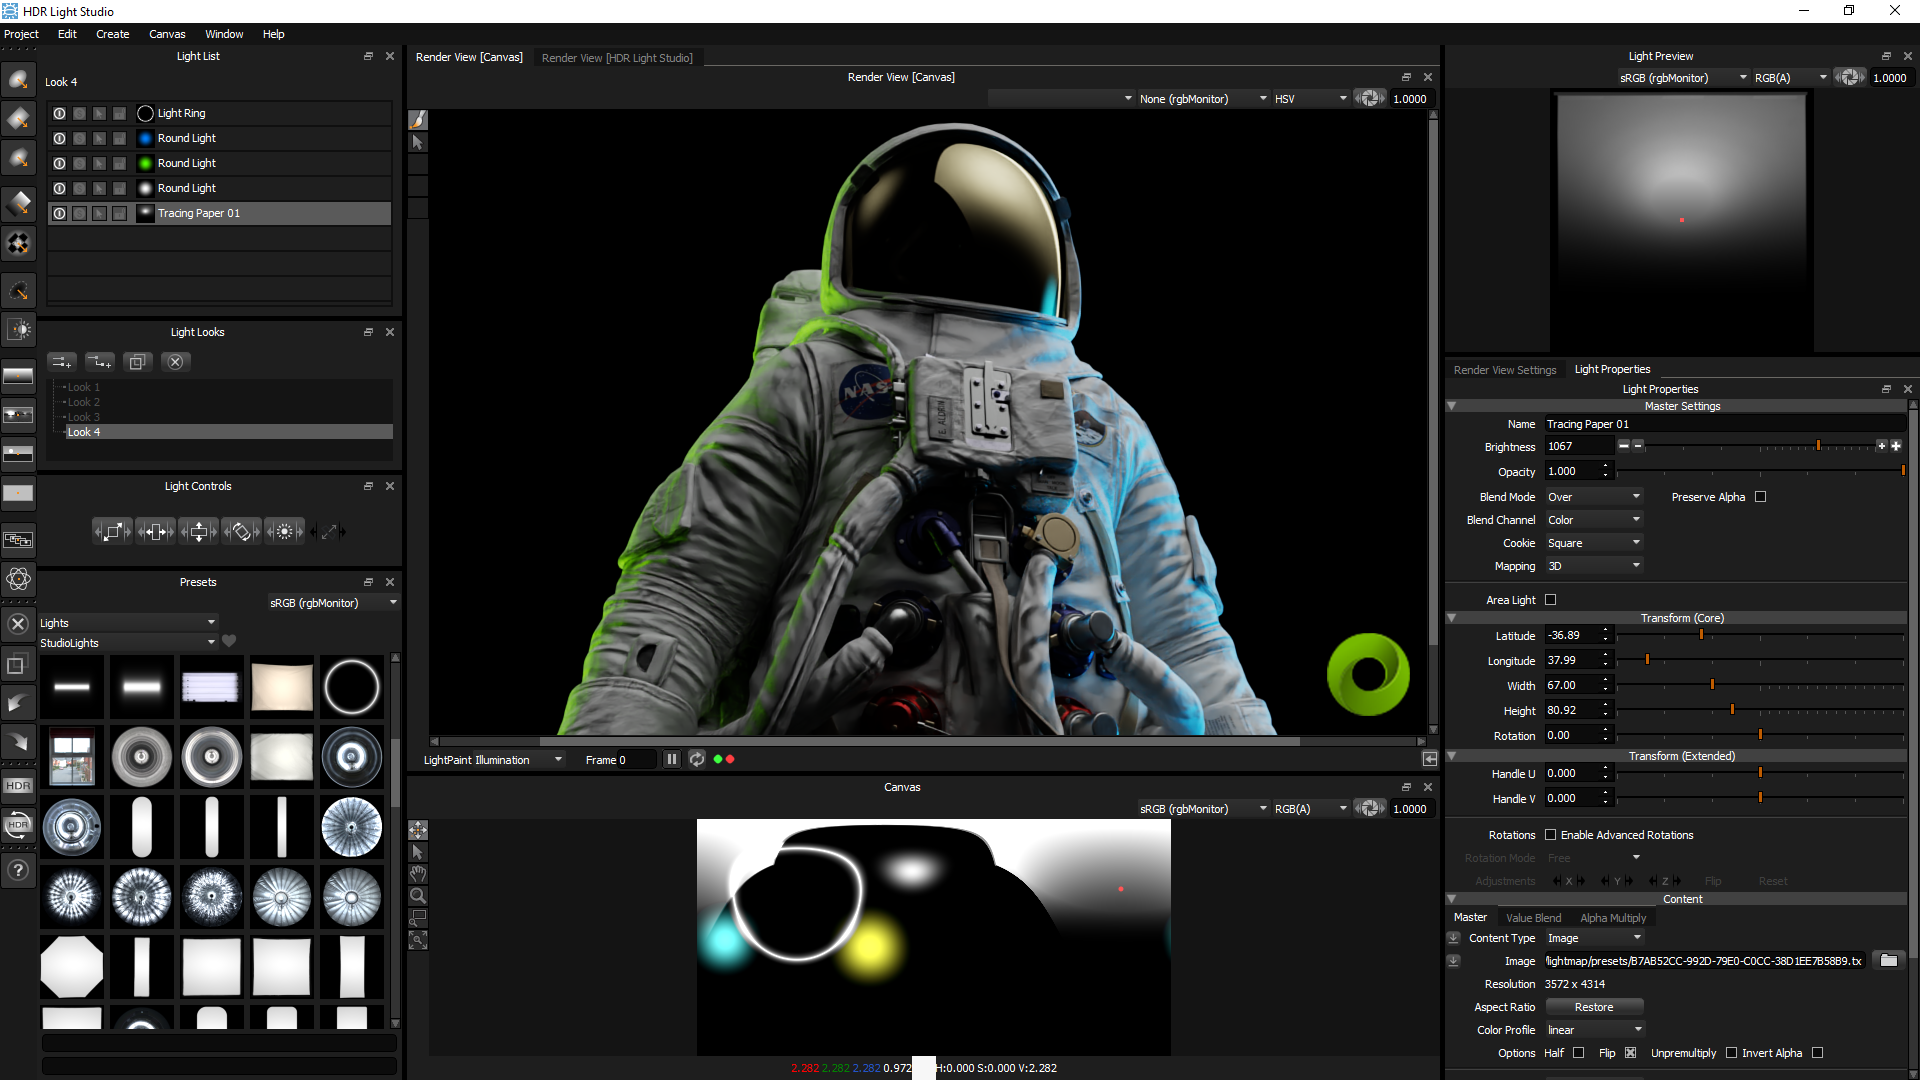 Omniverse Extension for HDR Light Studio